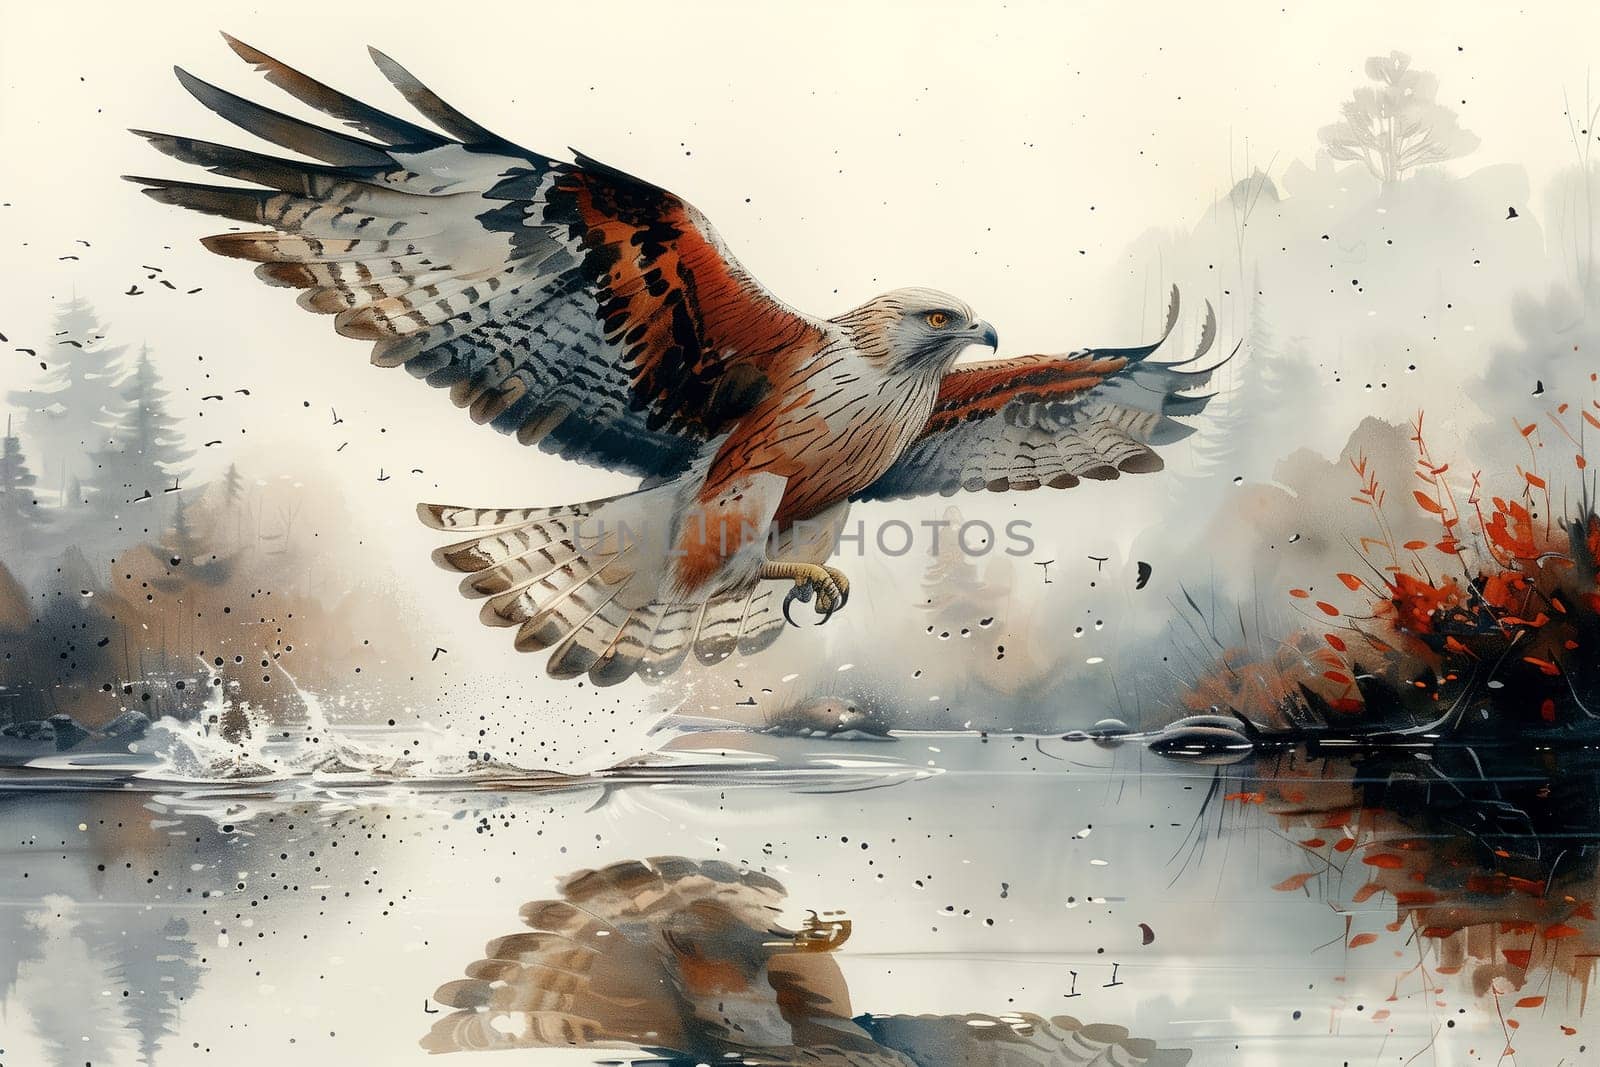 Accipitridae bird flying over water, a majestic scene in nature captured in art by richwolf